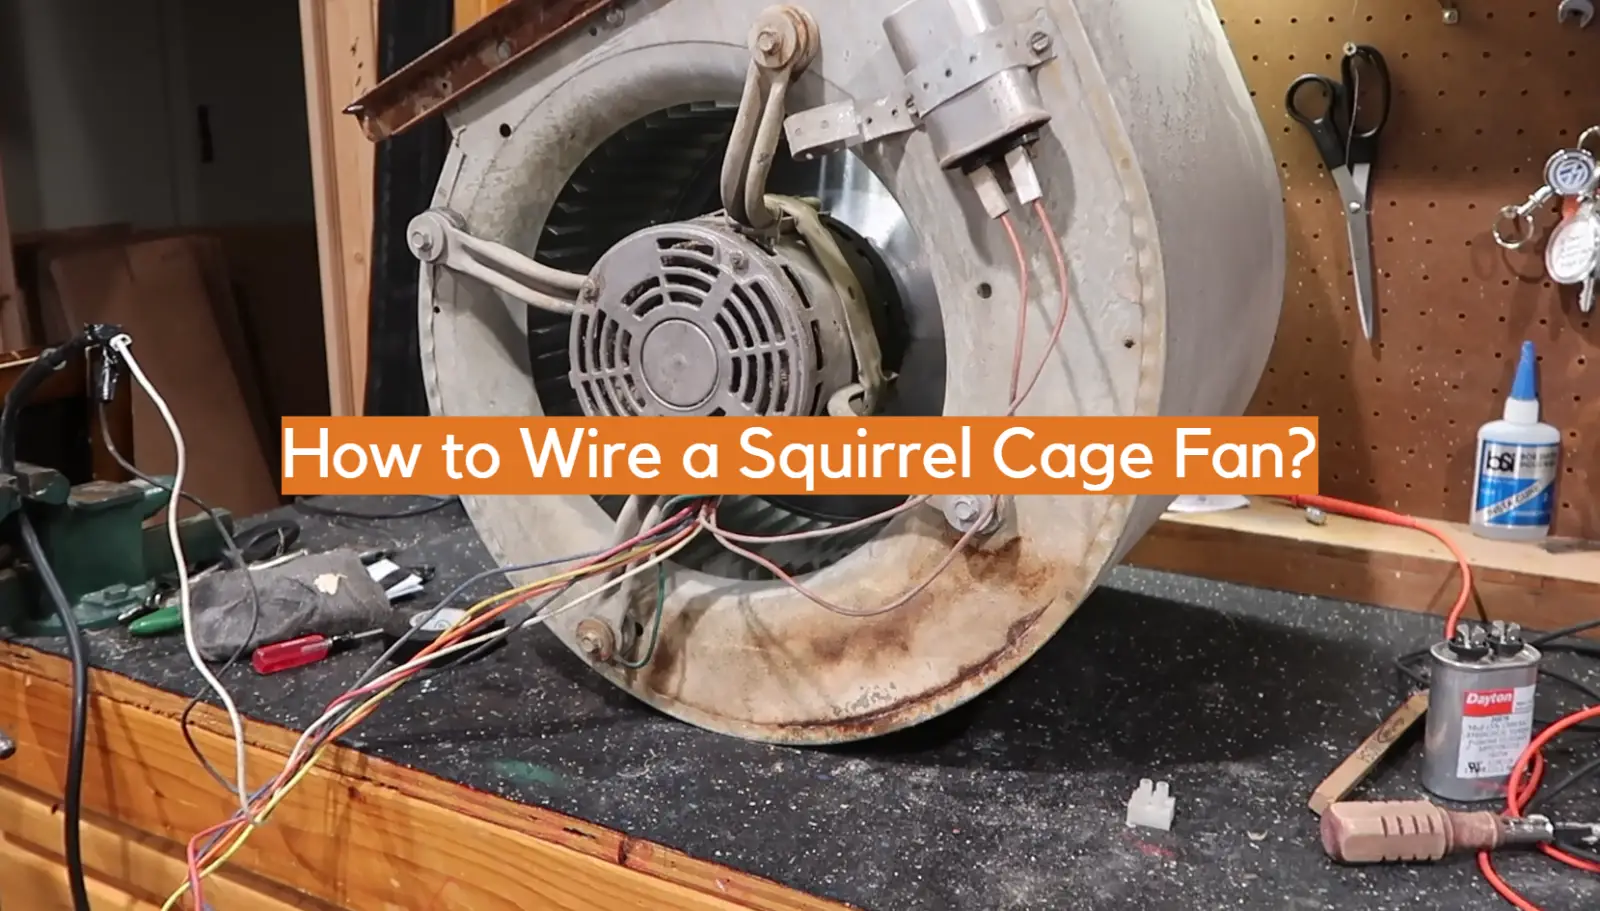 How to Wire a Squirrel Cage Fan?